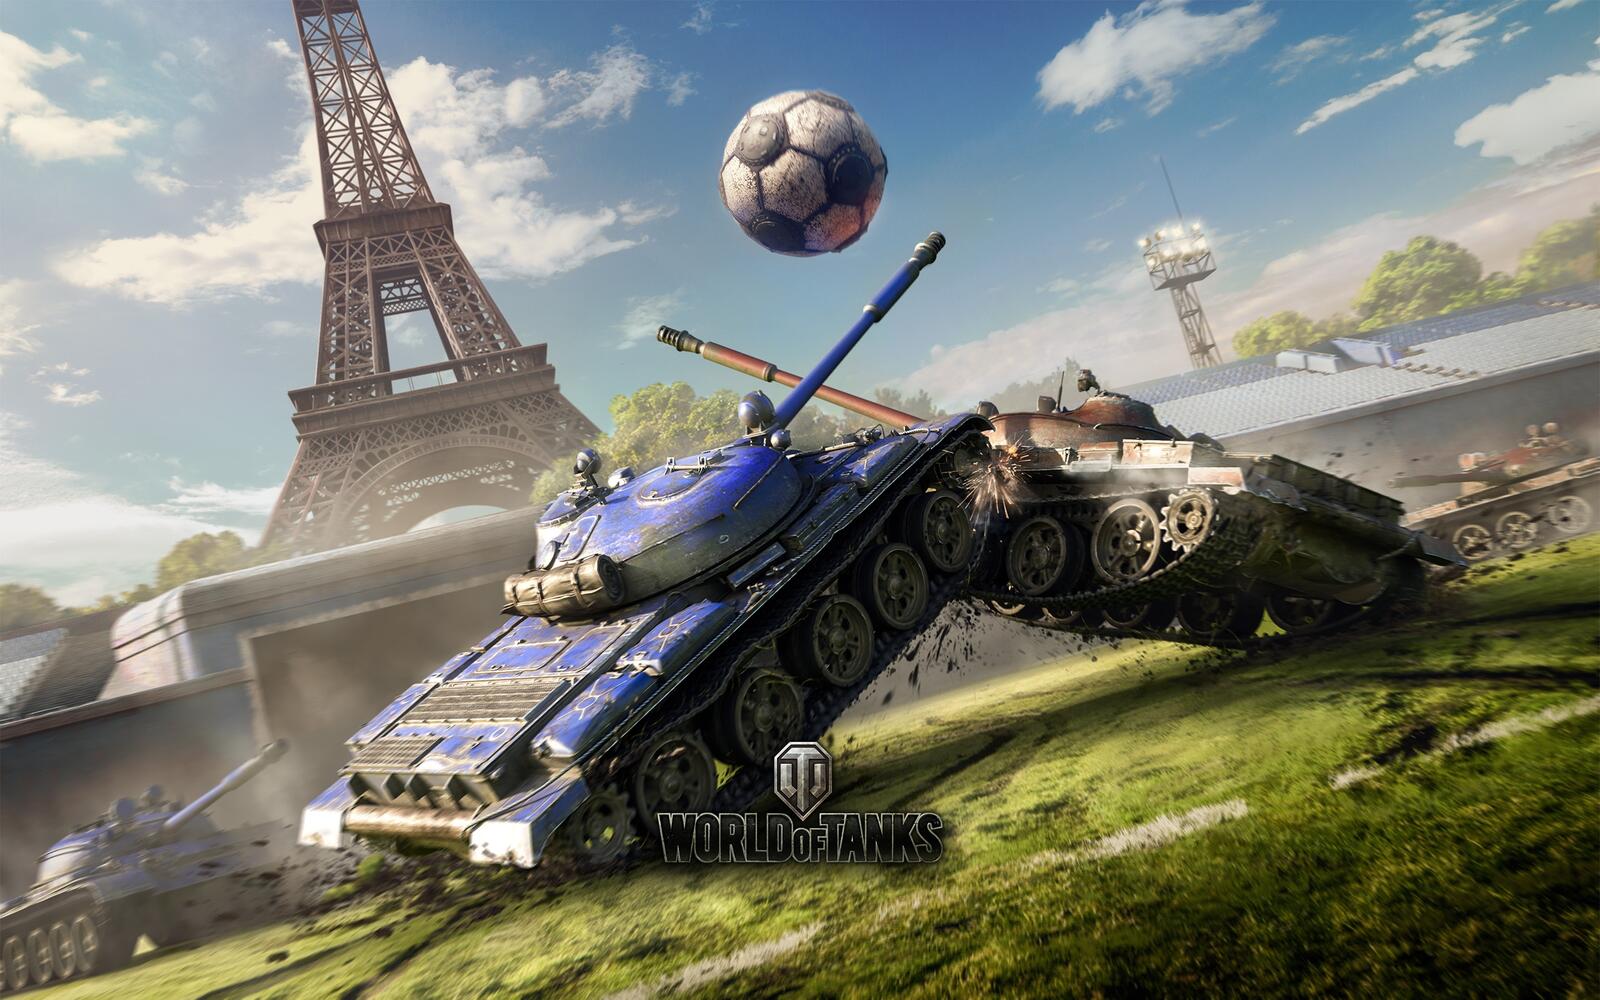 Wallpapers wallpaper world of tanks football clouds on the desktop